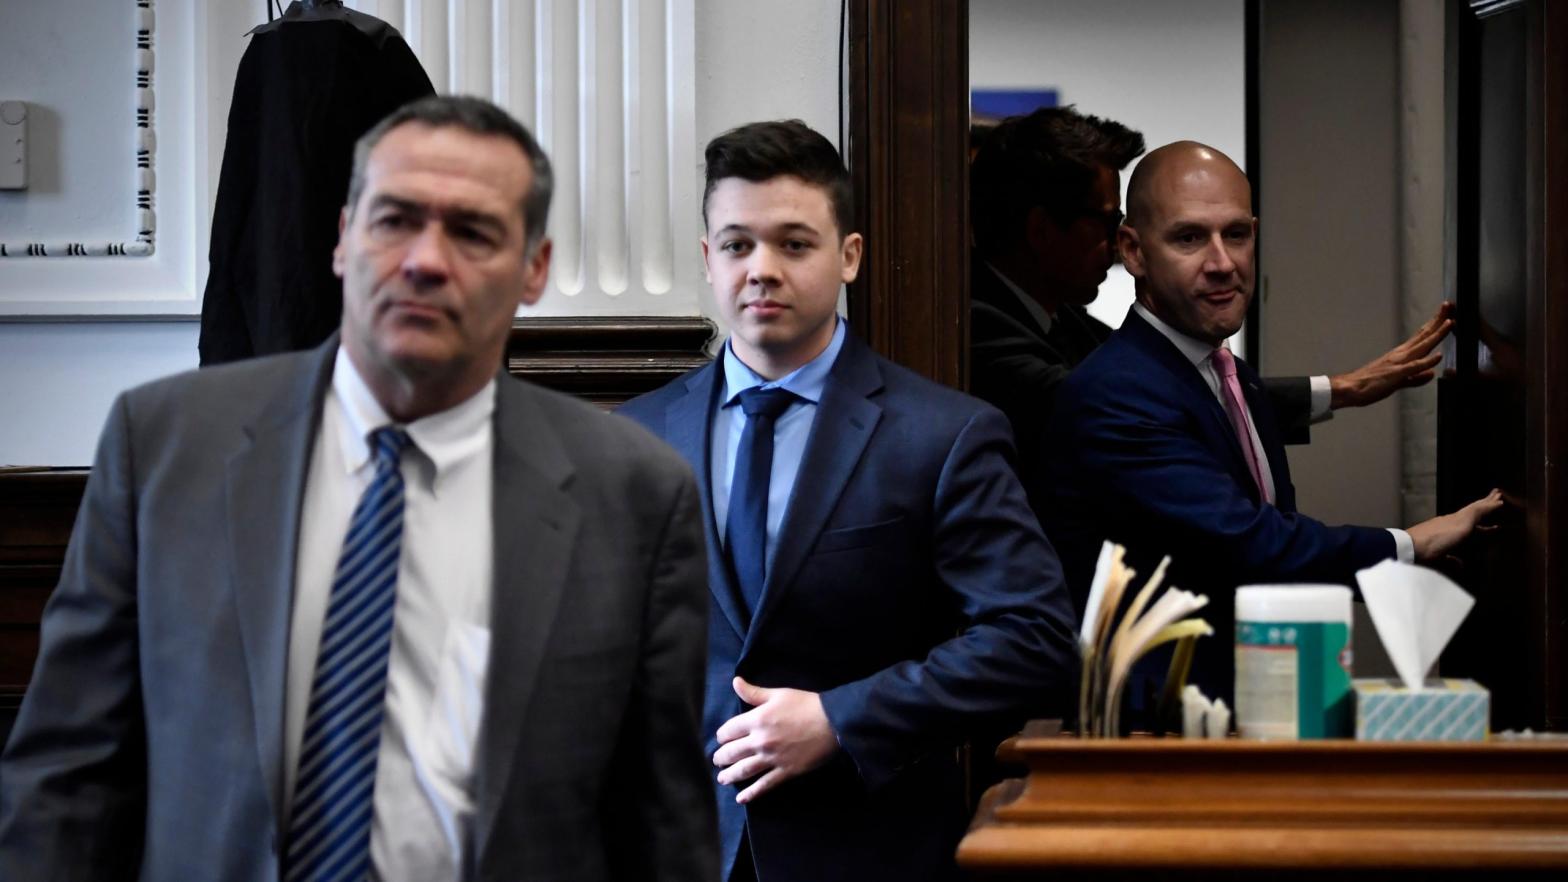 Kyle Rittenhouse, centre, seen between attorneys Mark Richards, left, and Corey Chirafisi, right, as they enter a meeting in the Kenosha County Courthouse on Nov. 18, 2021. (Photo: Sean Krajacic / Pool, Getty Images)